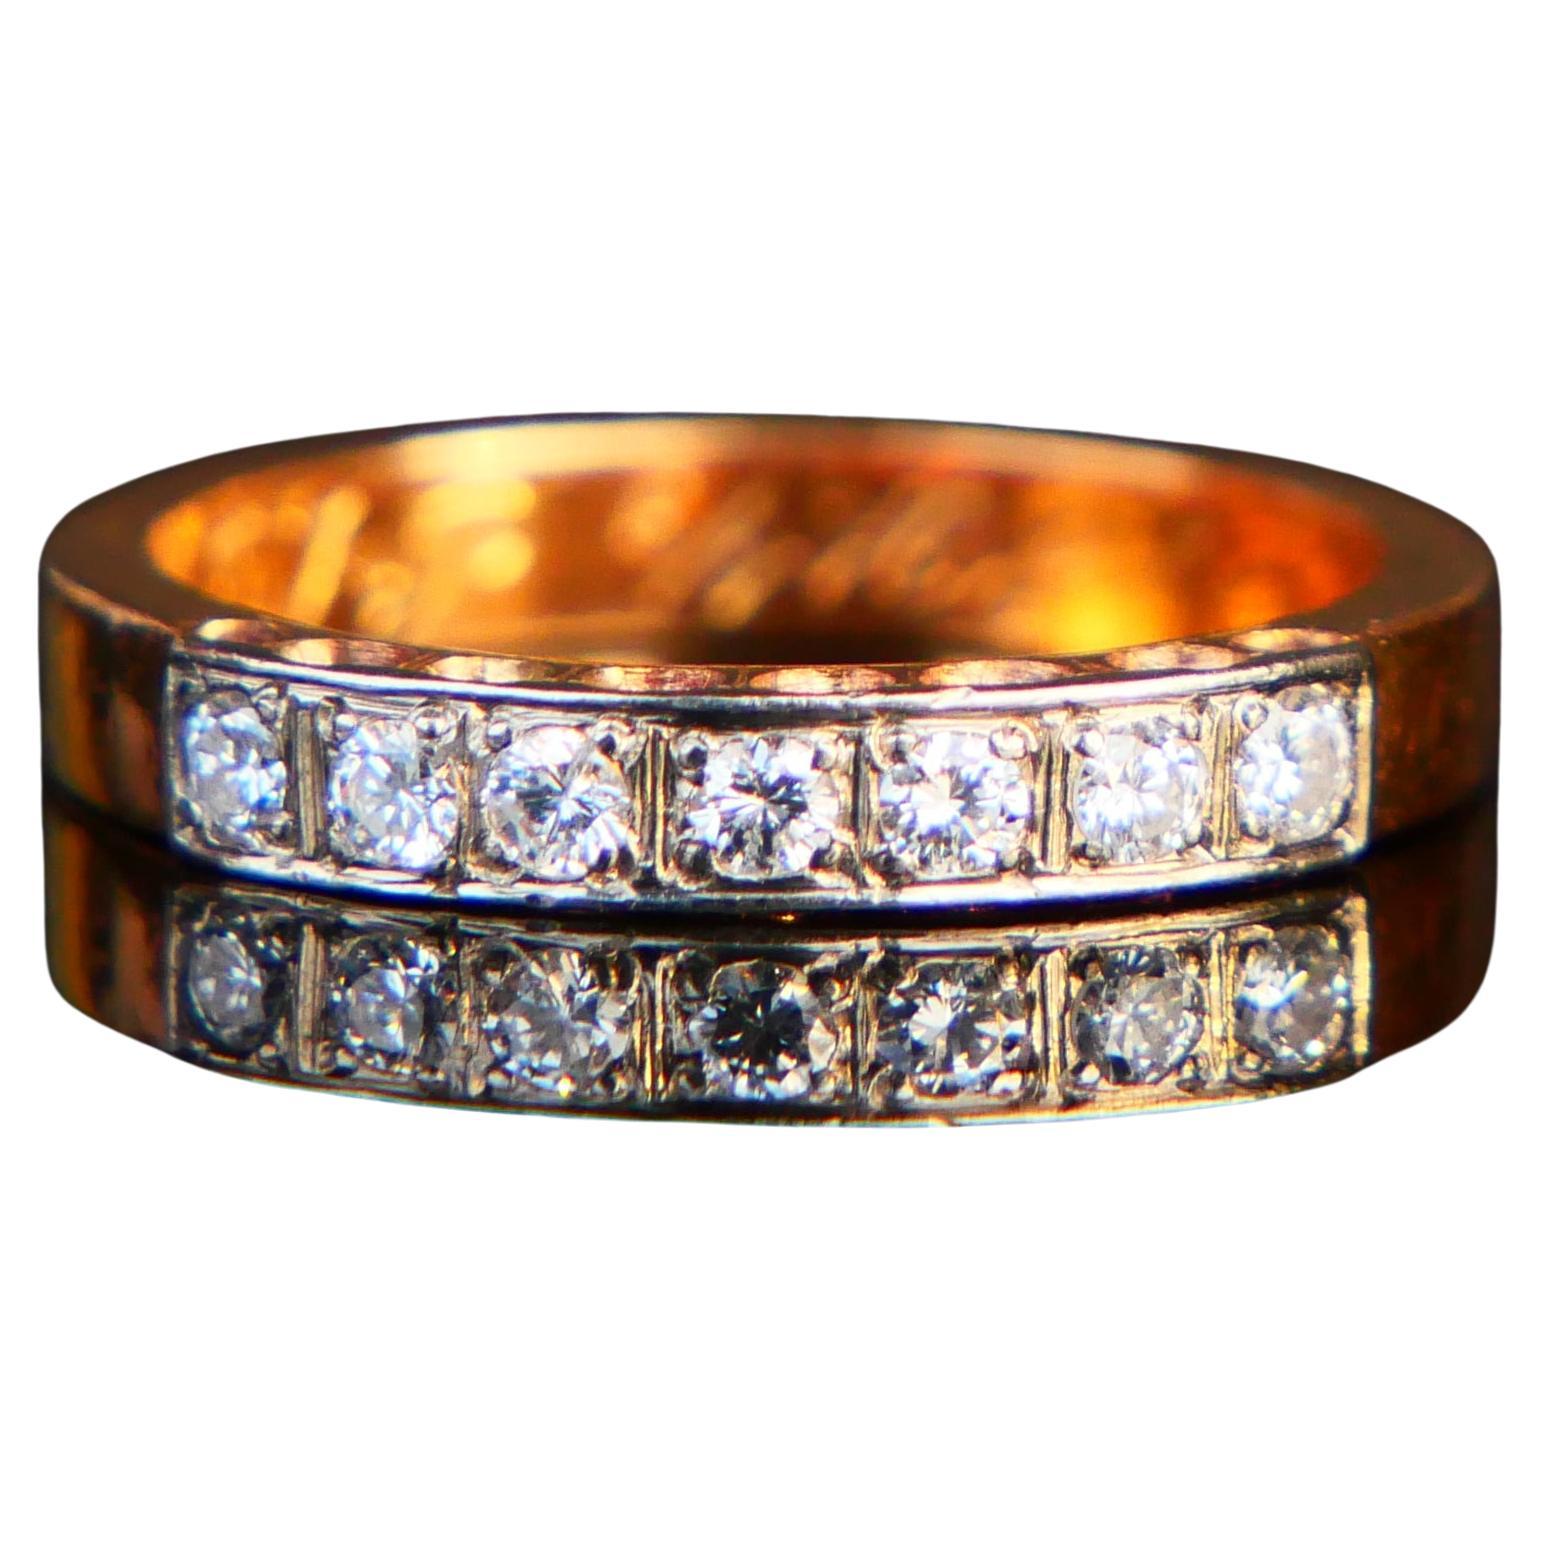 1907 Nordic Alliance Wedding Ring Diamonds solid 20K Gold US6 /4.25gr For Sale